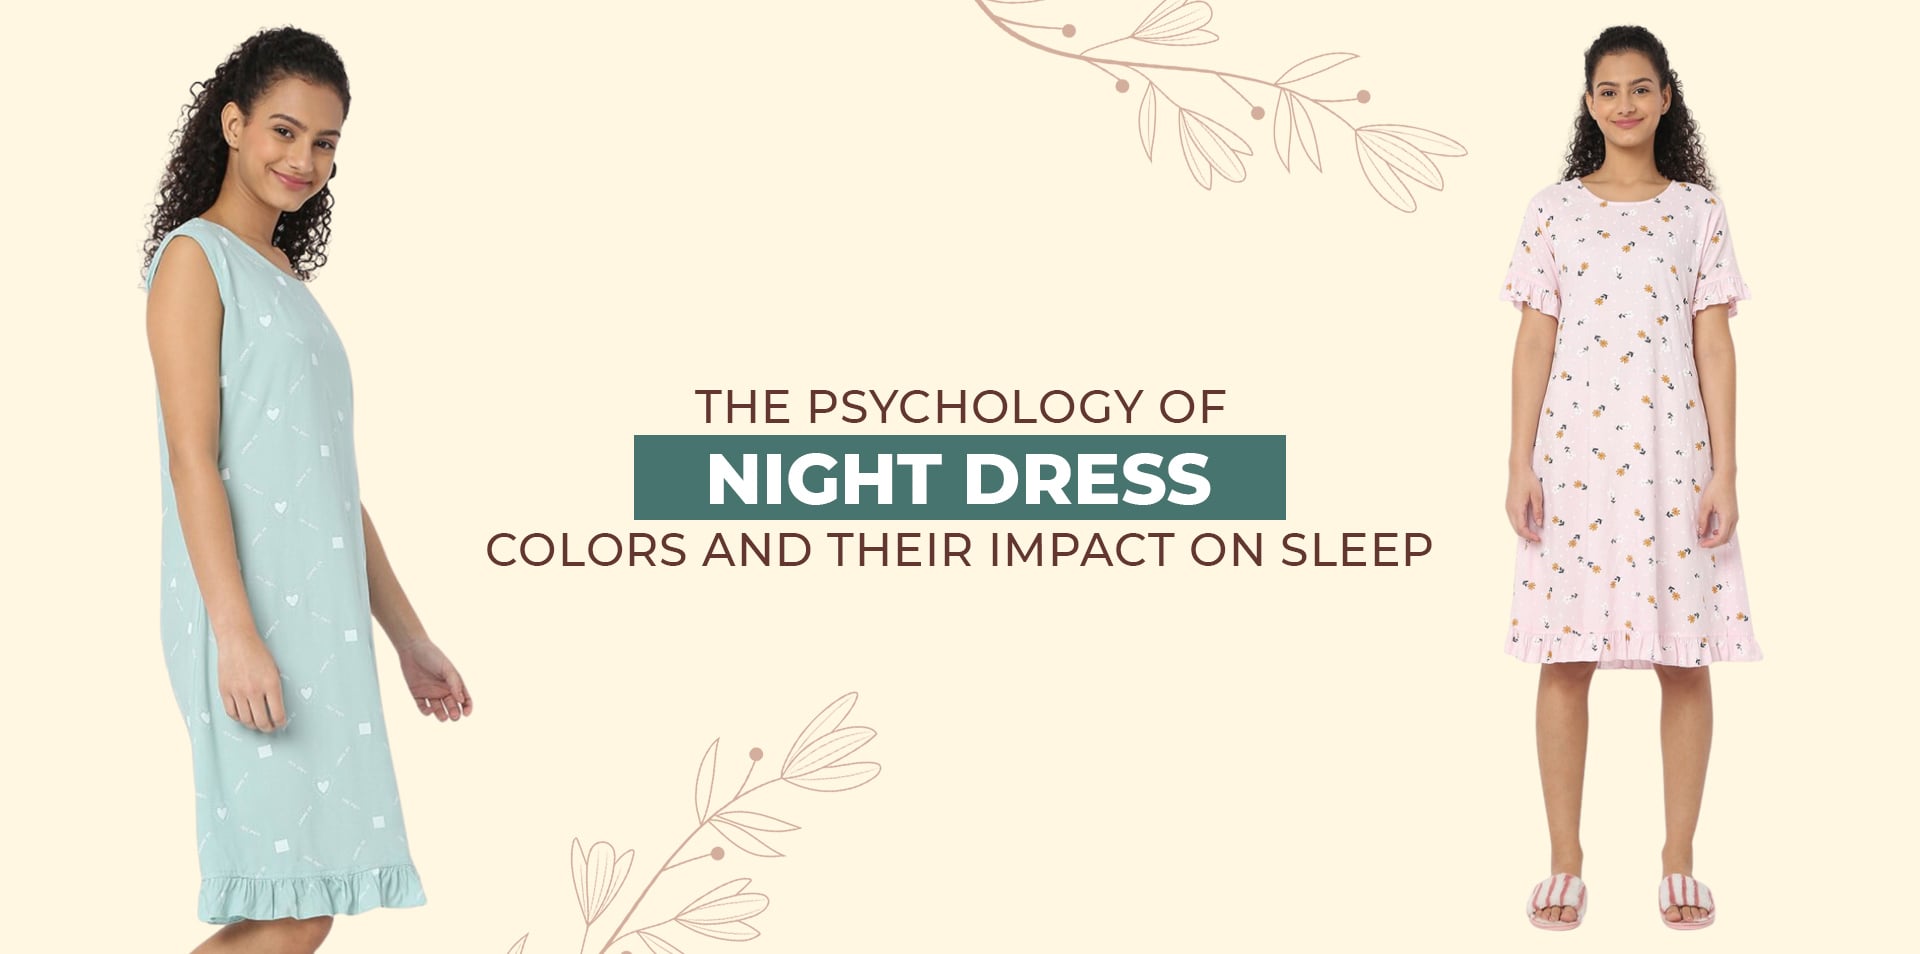 The Psychology of Night Dress Colors and Their Impact on Sleep